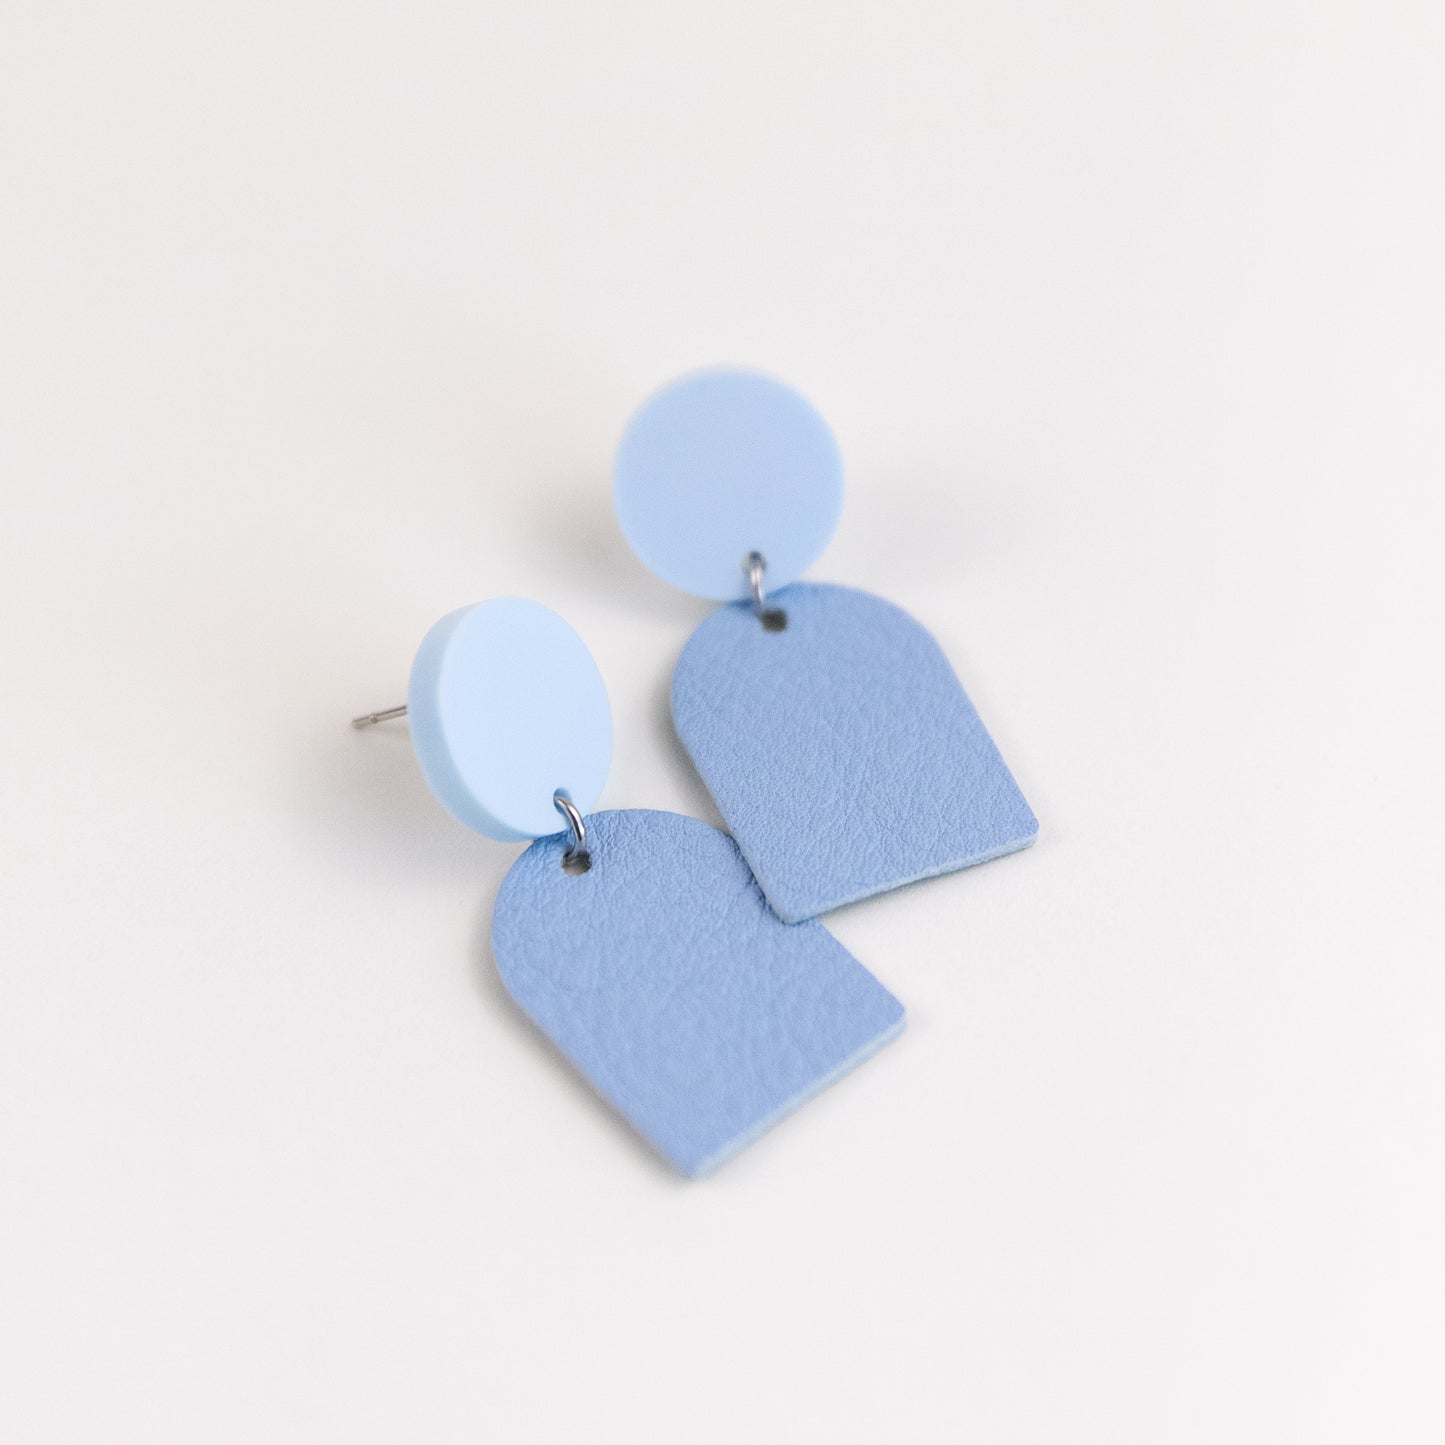 THE ARCH DANGLE in Baby Blue/ Lightweight Leather Statement Earrings